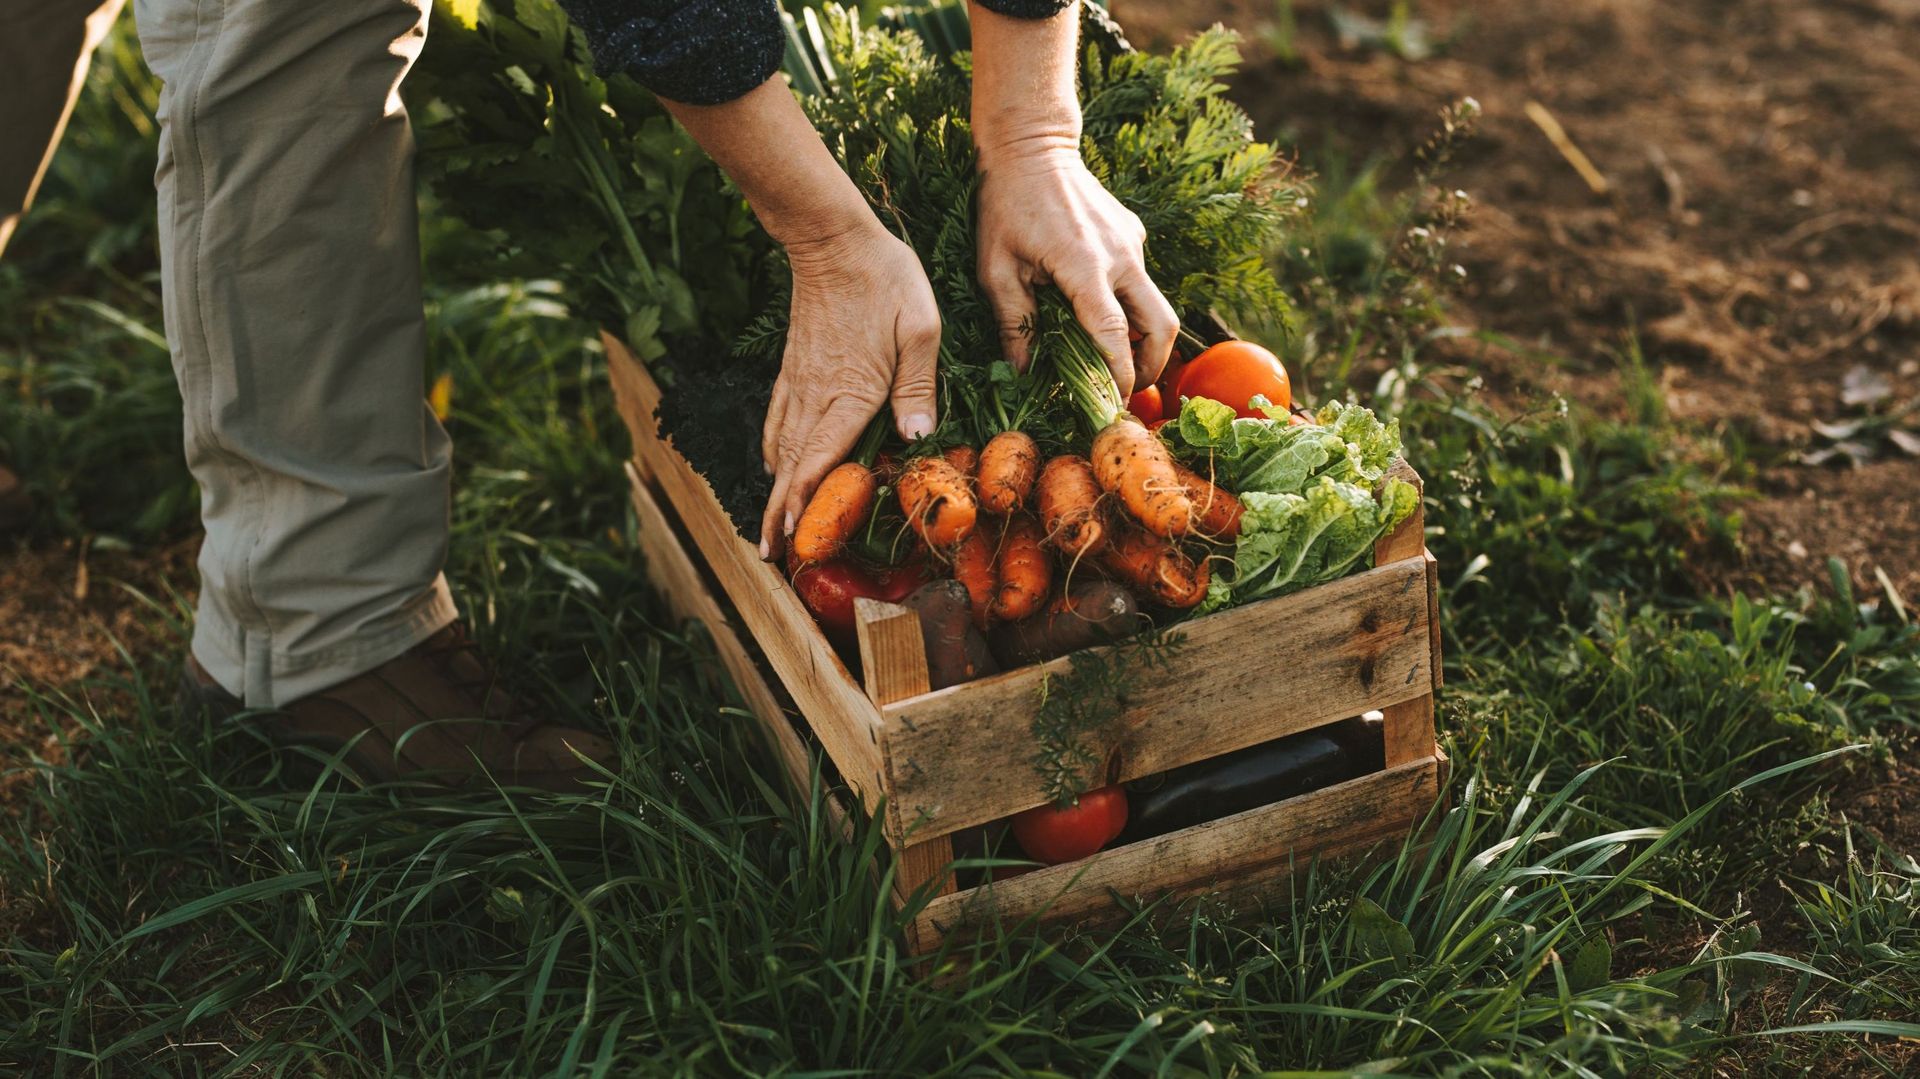 Low Angle View Of Farmer Vegetables On Field